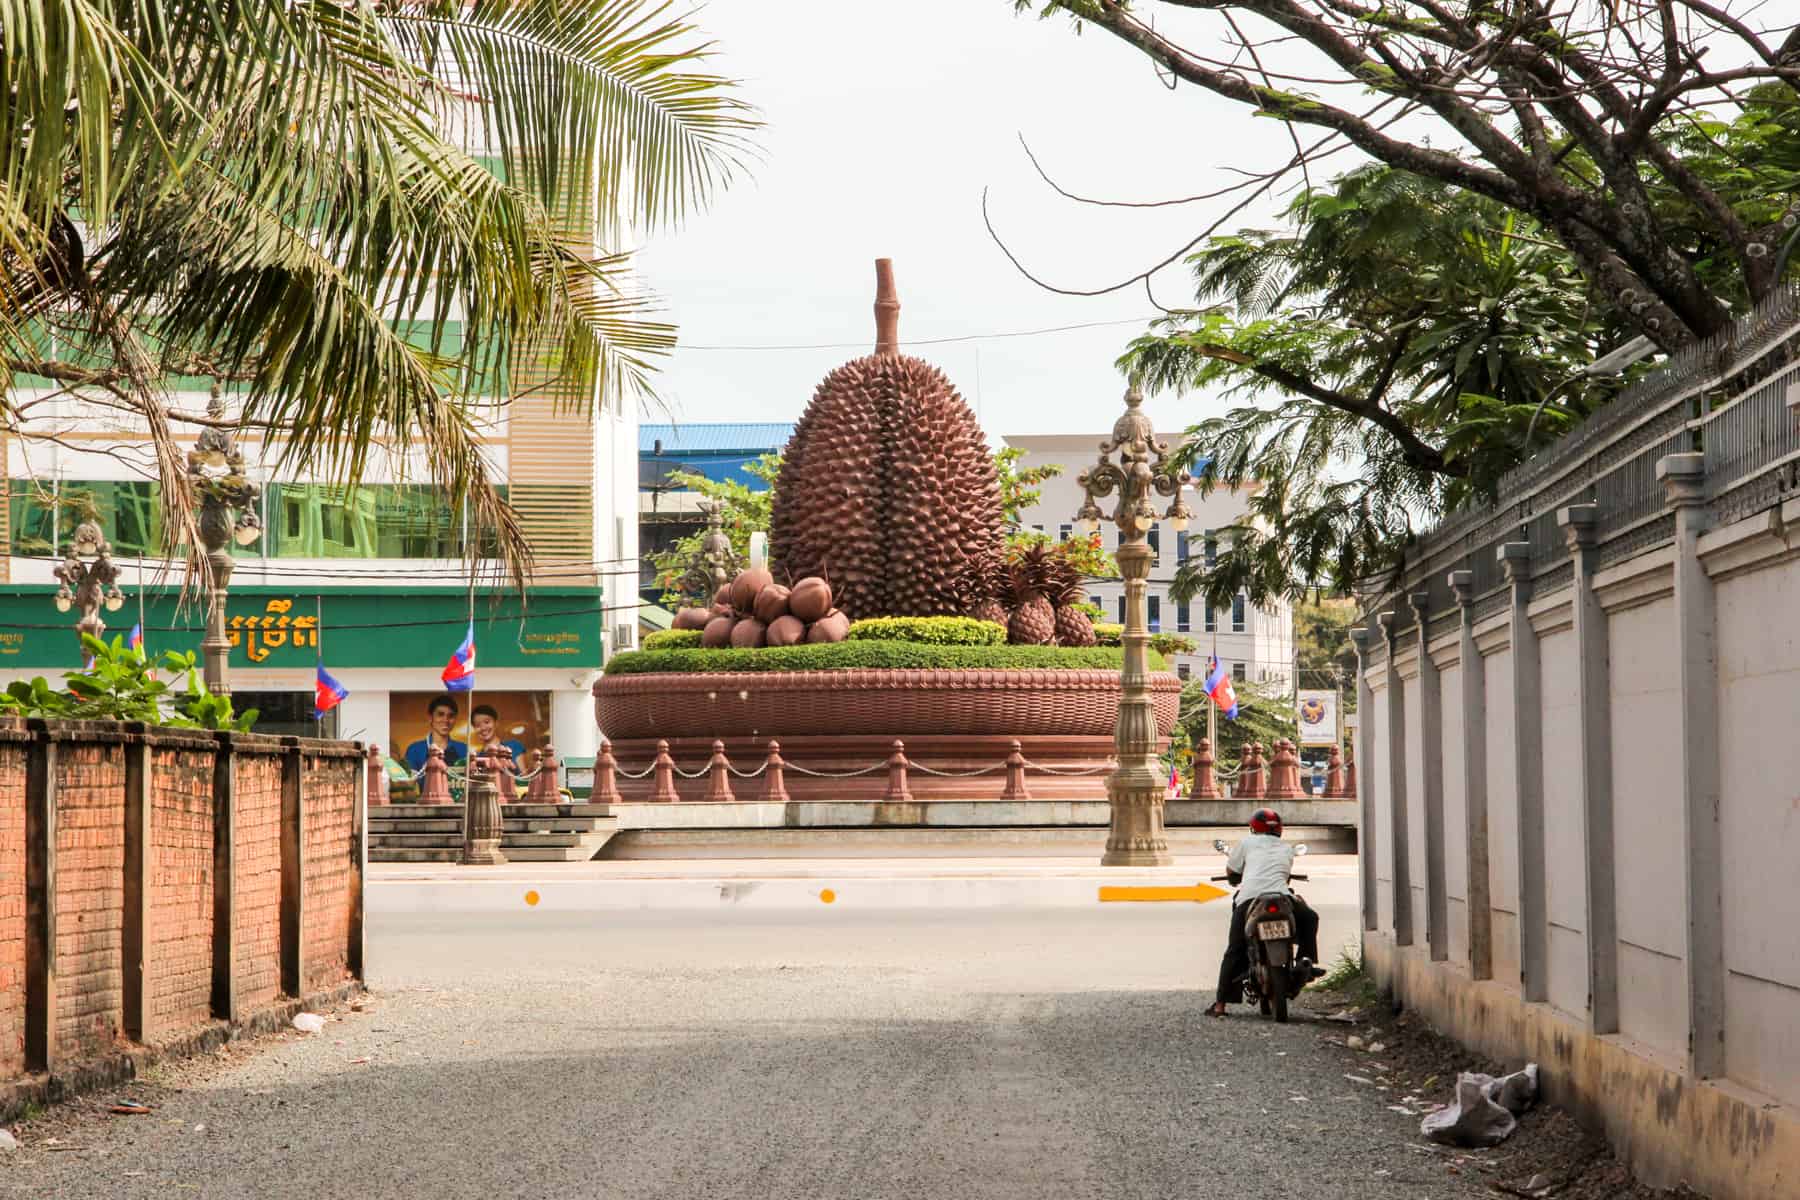 View from a side street where a man on a motorbike looks towards a roundabout with a huge carved Durian fruit sculpture.